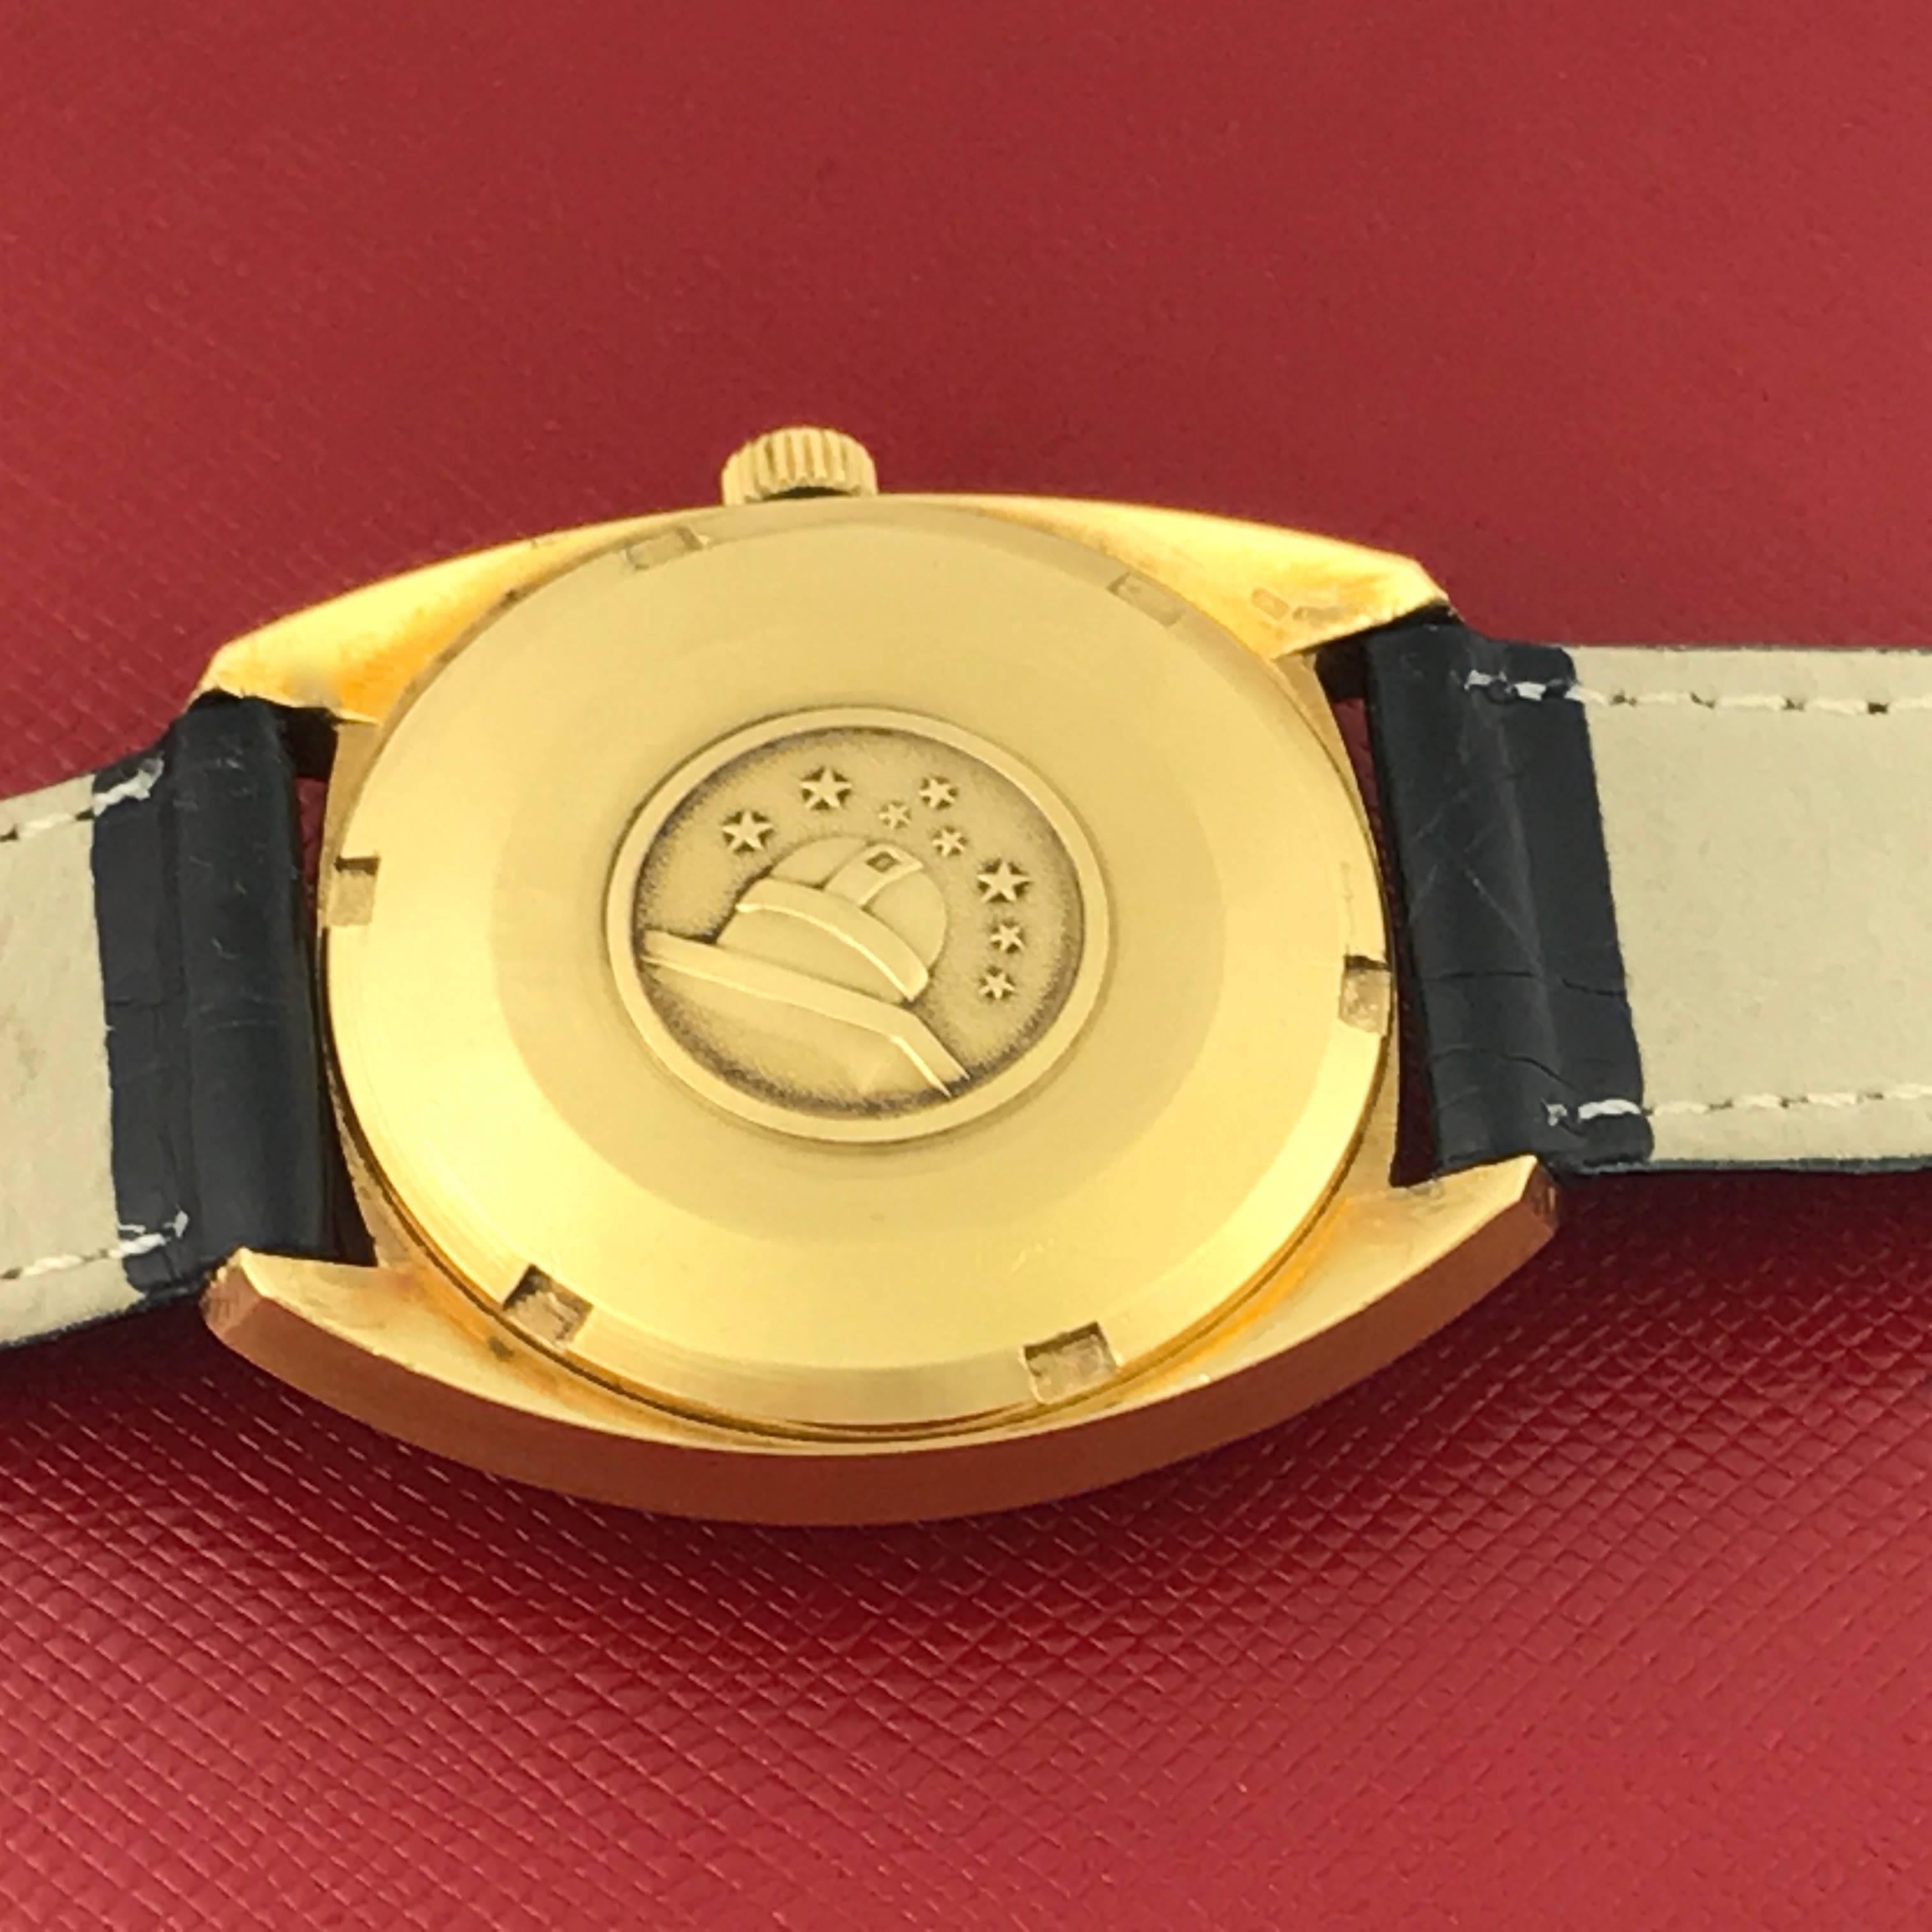 Omega Yellow Gold Constellation Date Automatic Wristwatch, circa 1969 In Excellent Condition For Sale In Dallas, TX